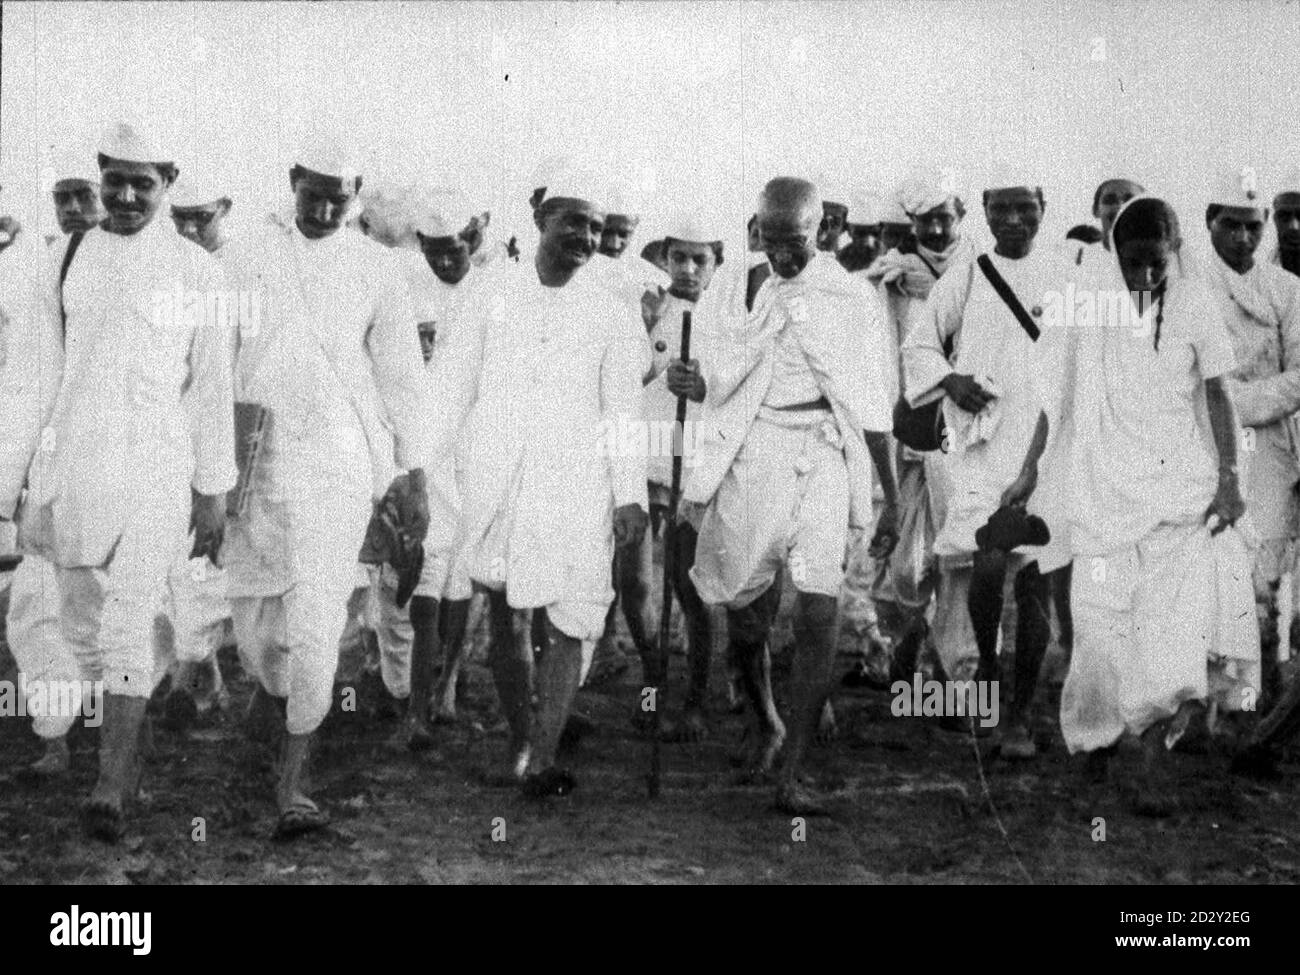 Library filer dated 06.04.30. Civil Disobedience in India. Mr. Gandhi (with staff in hand) and his volunteeers marching to the sea face at Dandi on the morning of April 6th, when they broke the Salt laws. 25.04.30. Mahatma Gandhi became widely known as the man credited with securing India's independence. He had led a campaign of non-violent resistance to British rule for decades. But, on the day the sun finally set on the British Raj in India at the stroke of midnight on August 14 1947, and Gandhi's goal was realised, he could not rejoicing for long. Jubilant scenes across the country qui Stock Photo